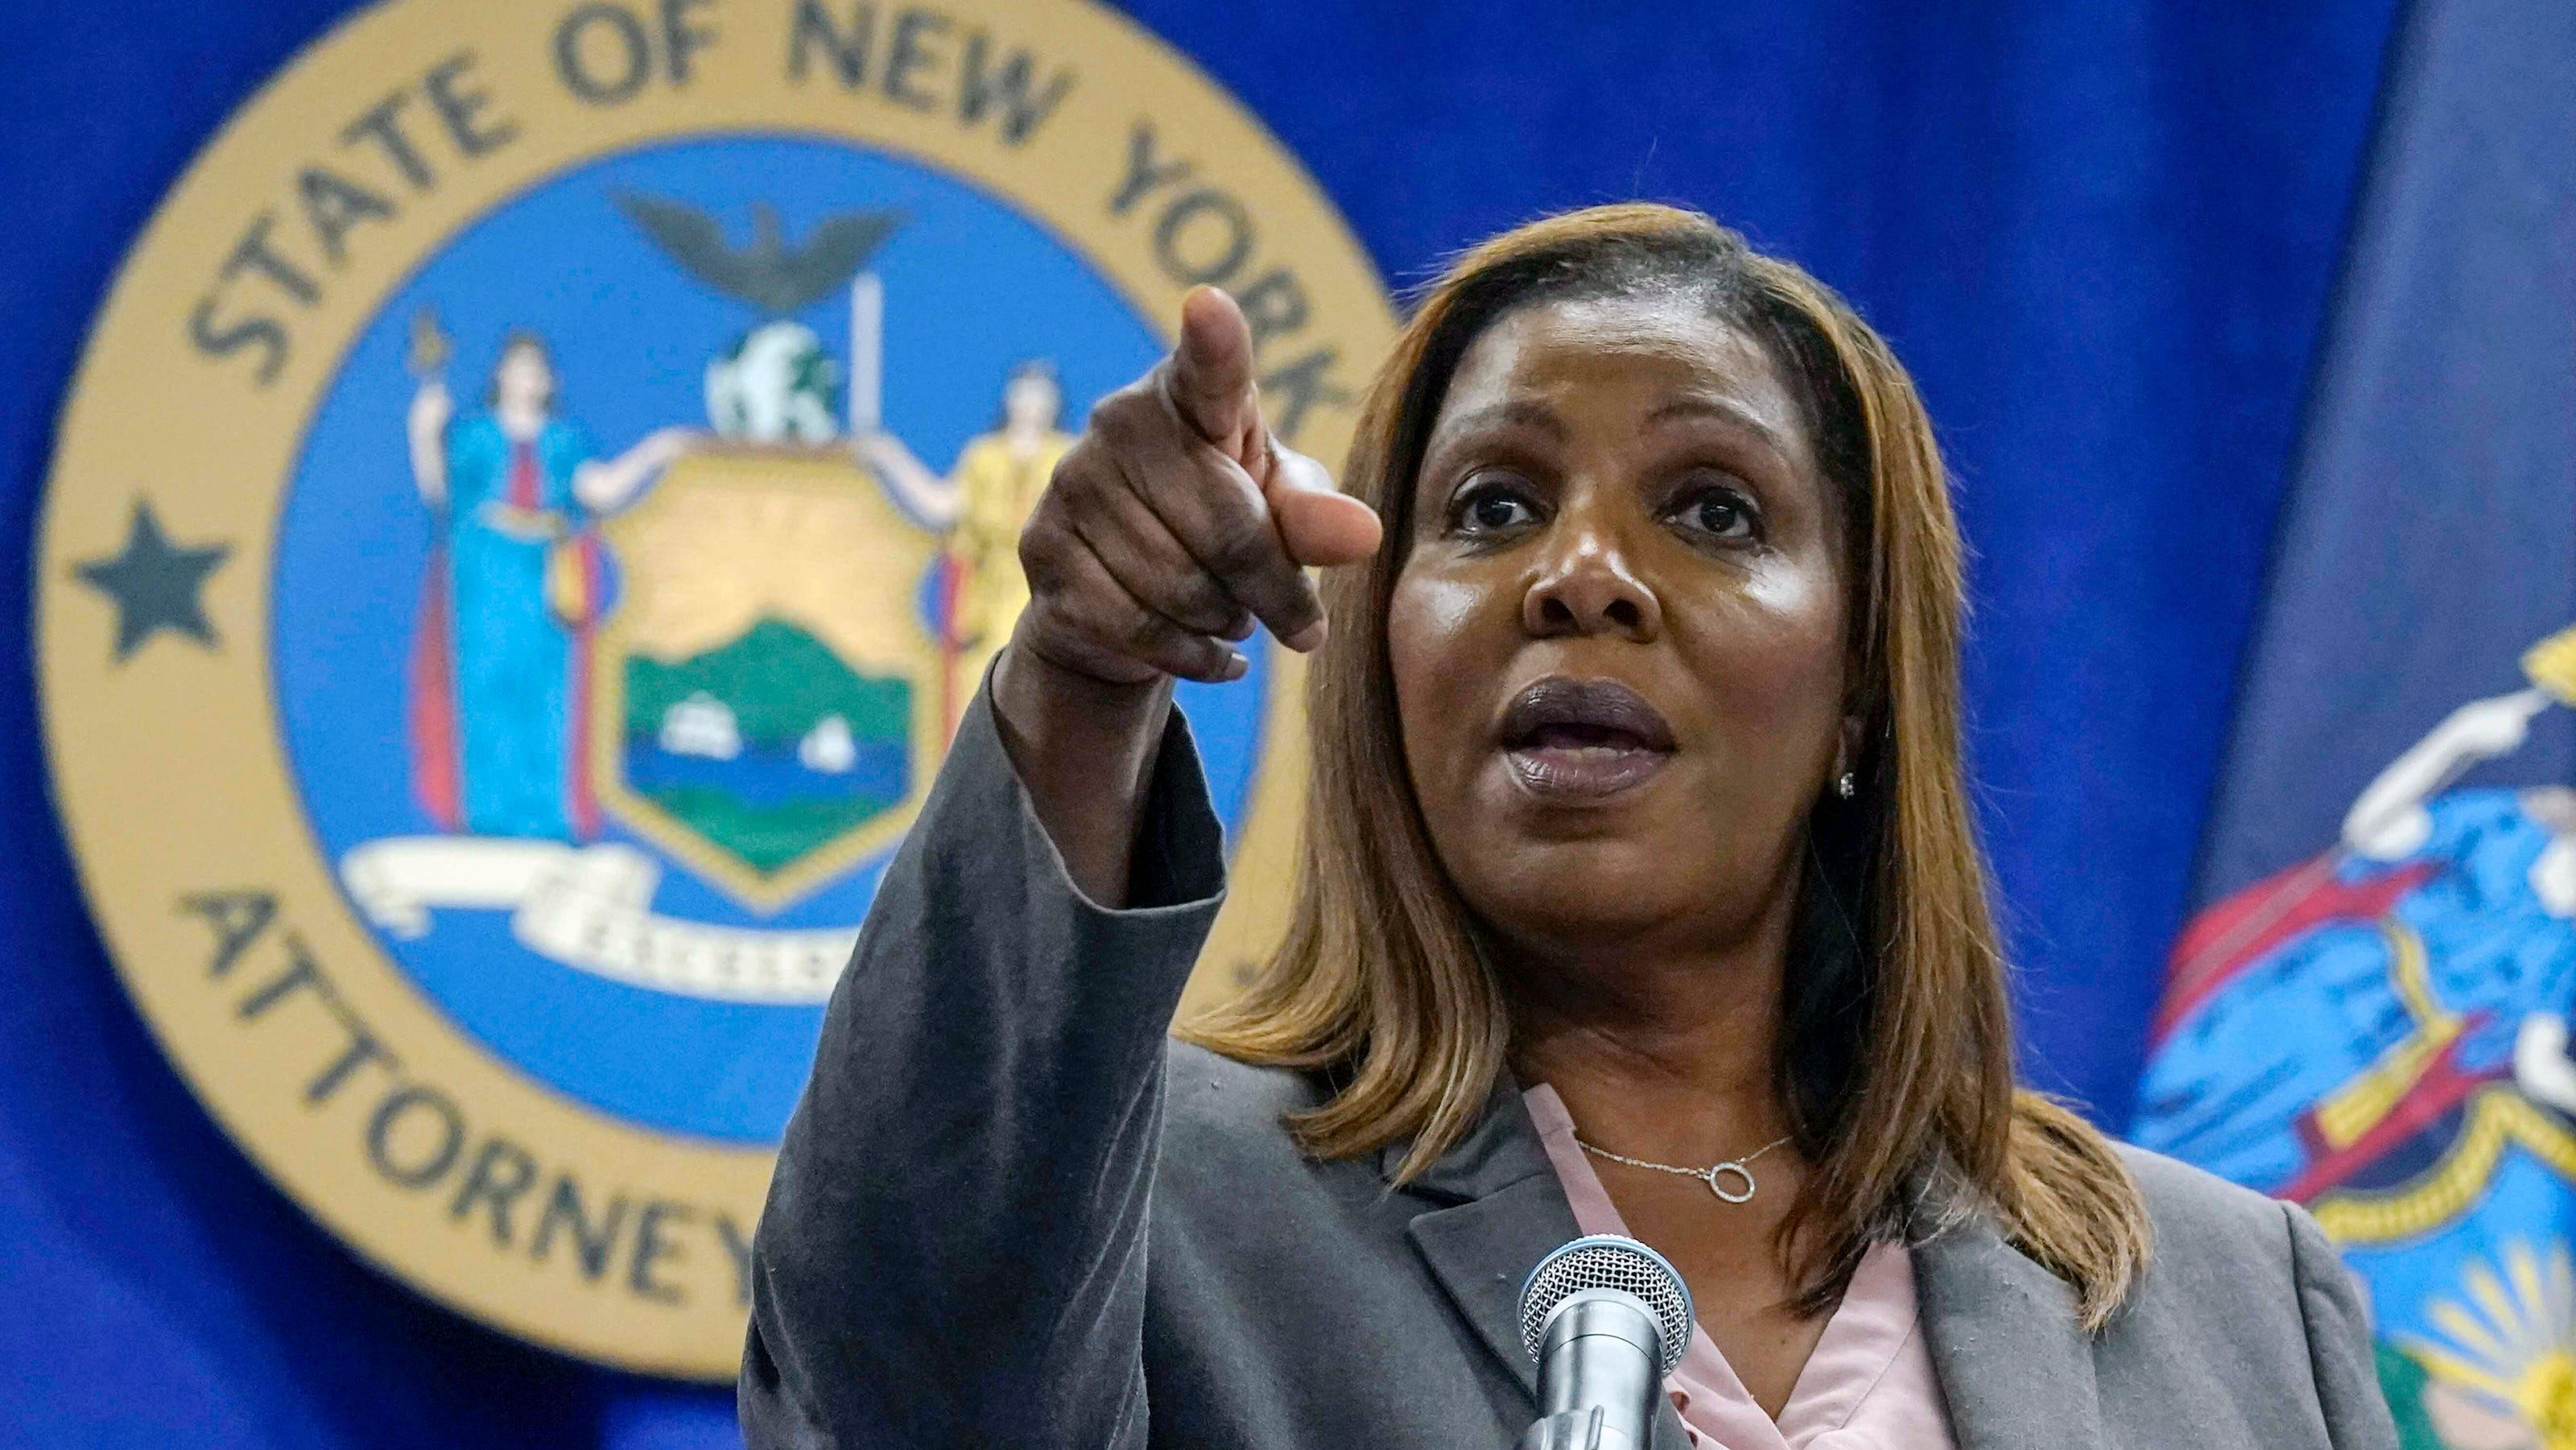 New York Attorney General Letitia James Expected To Announce Run For Governor 4888